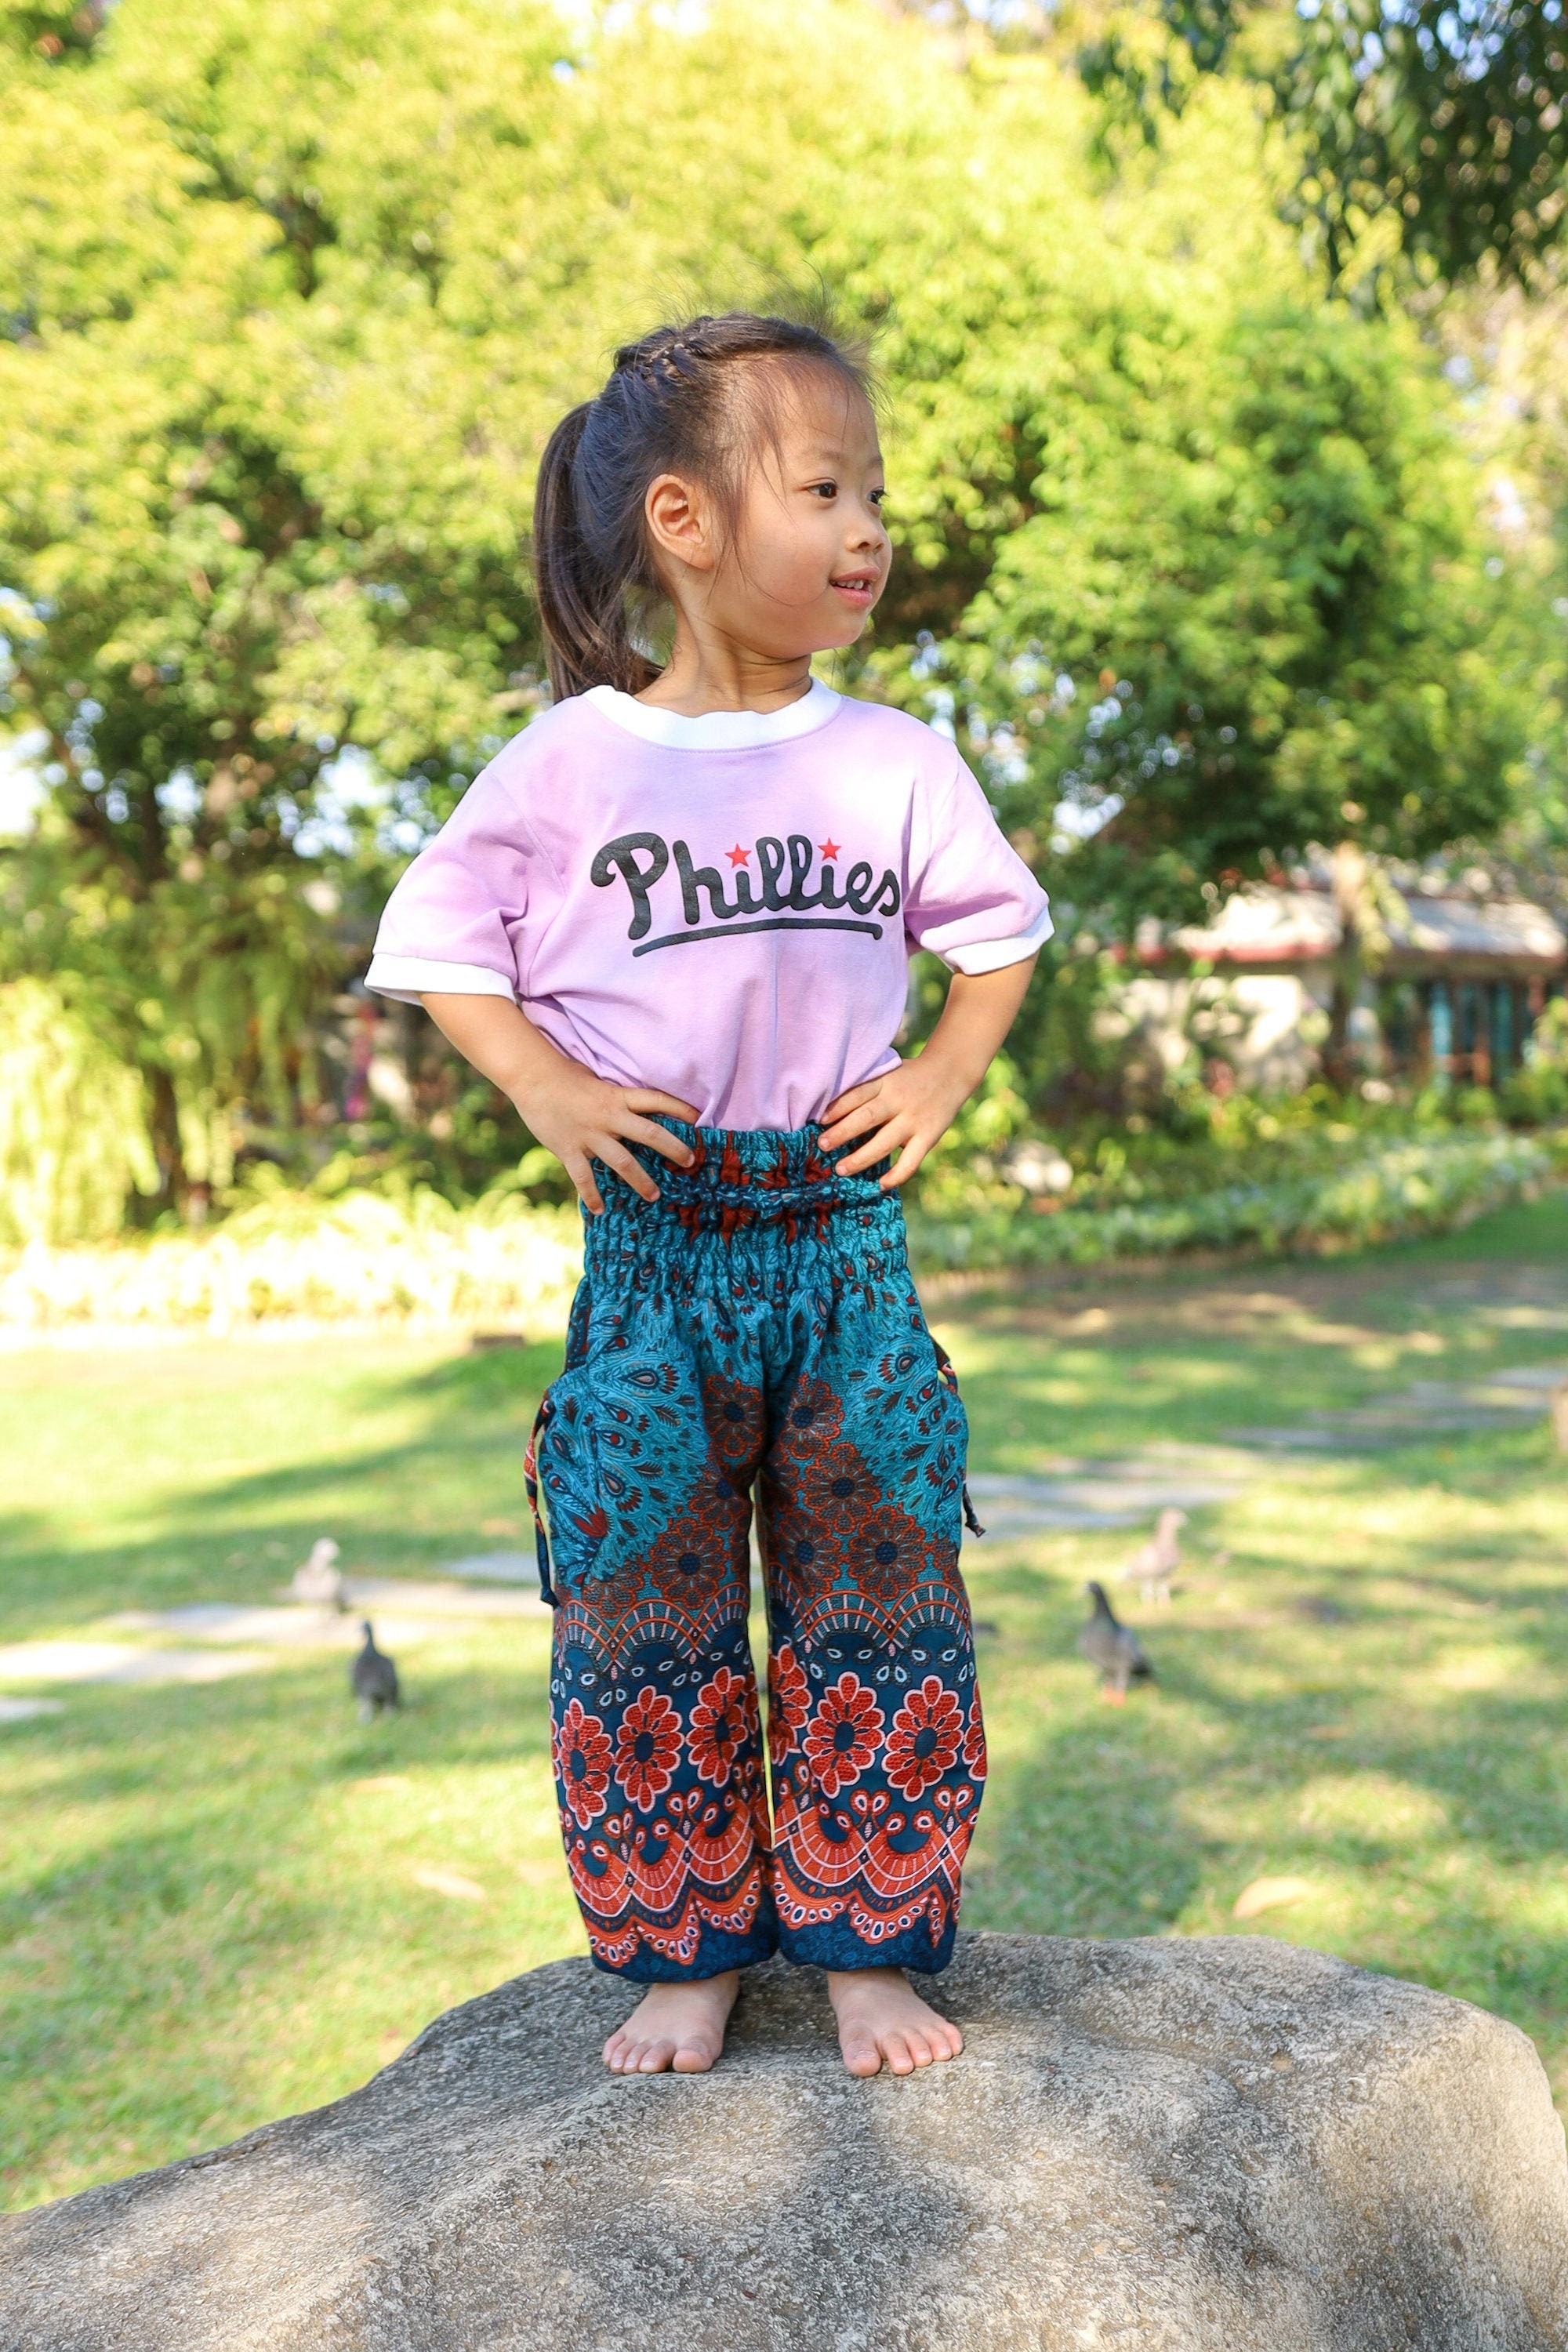 GIRLS PINK HAREM Pants Many Kids Size Toddlers Trousers Kids Comfy Clothing  Light Weight Summer Pants for Children's 